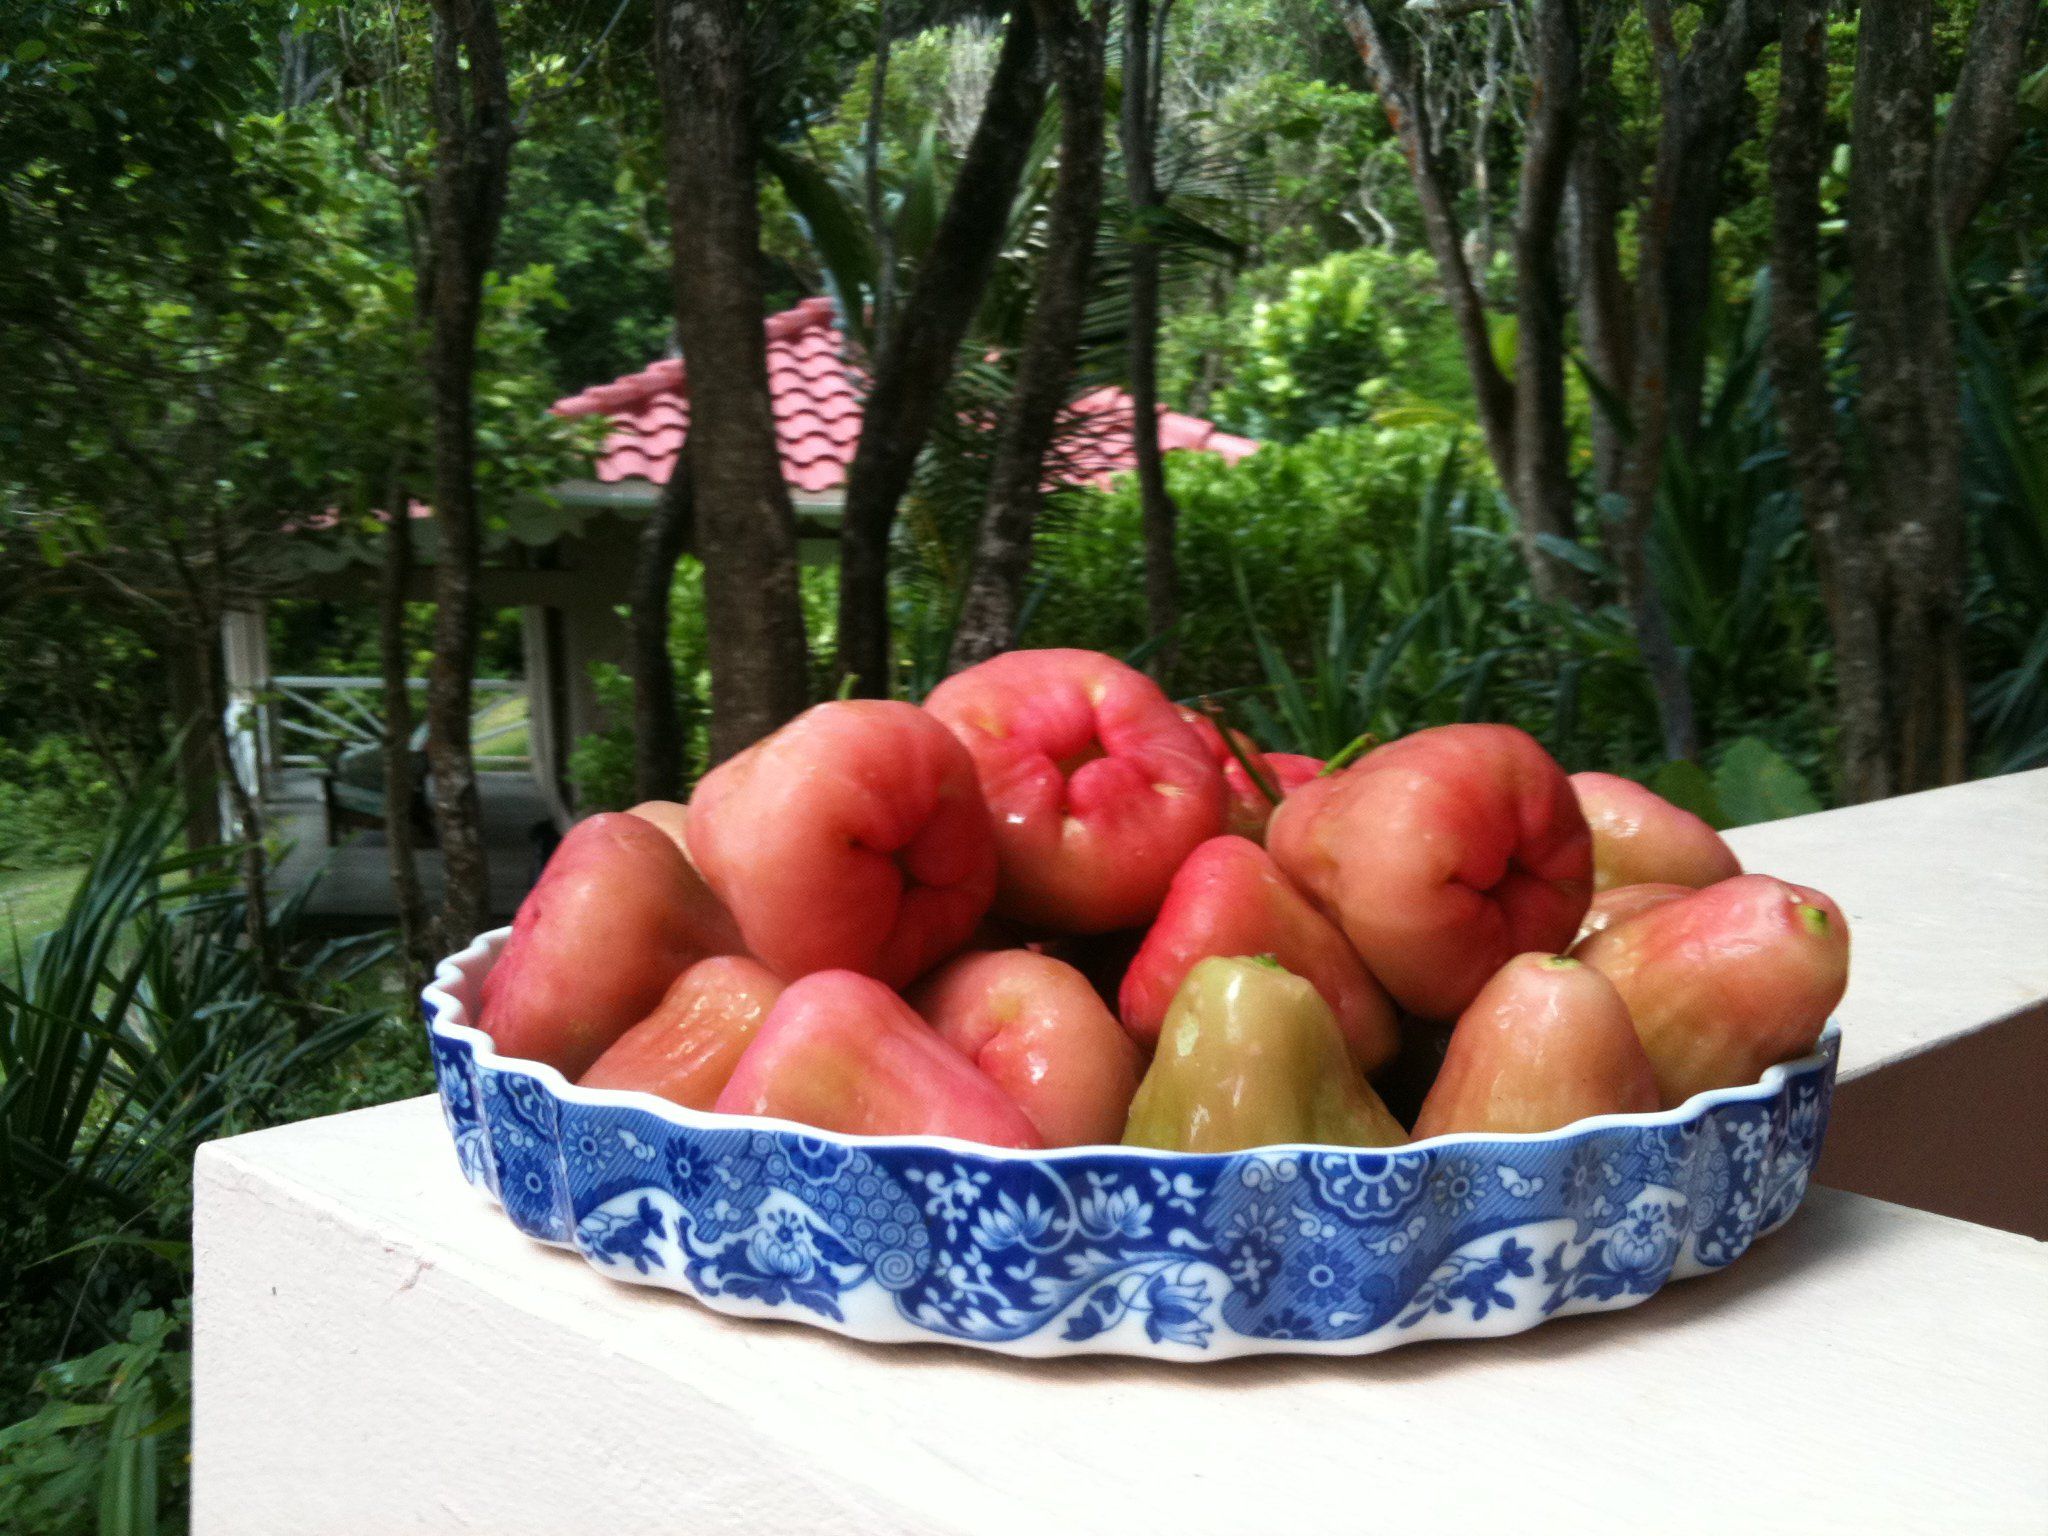 Wax apples, one of the most fresh crunchy fruits in Grenada, at ...